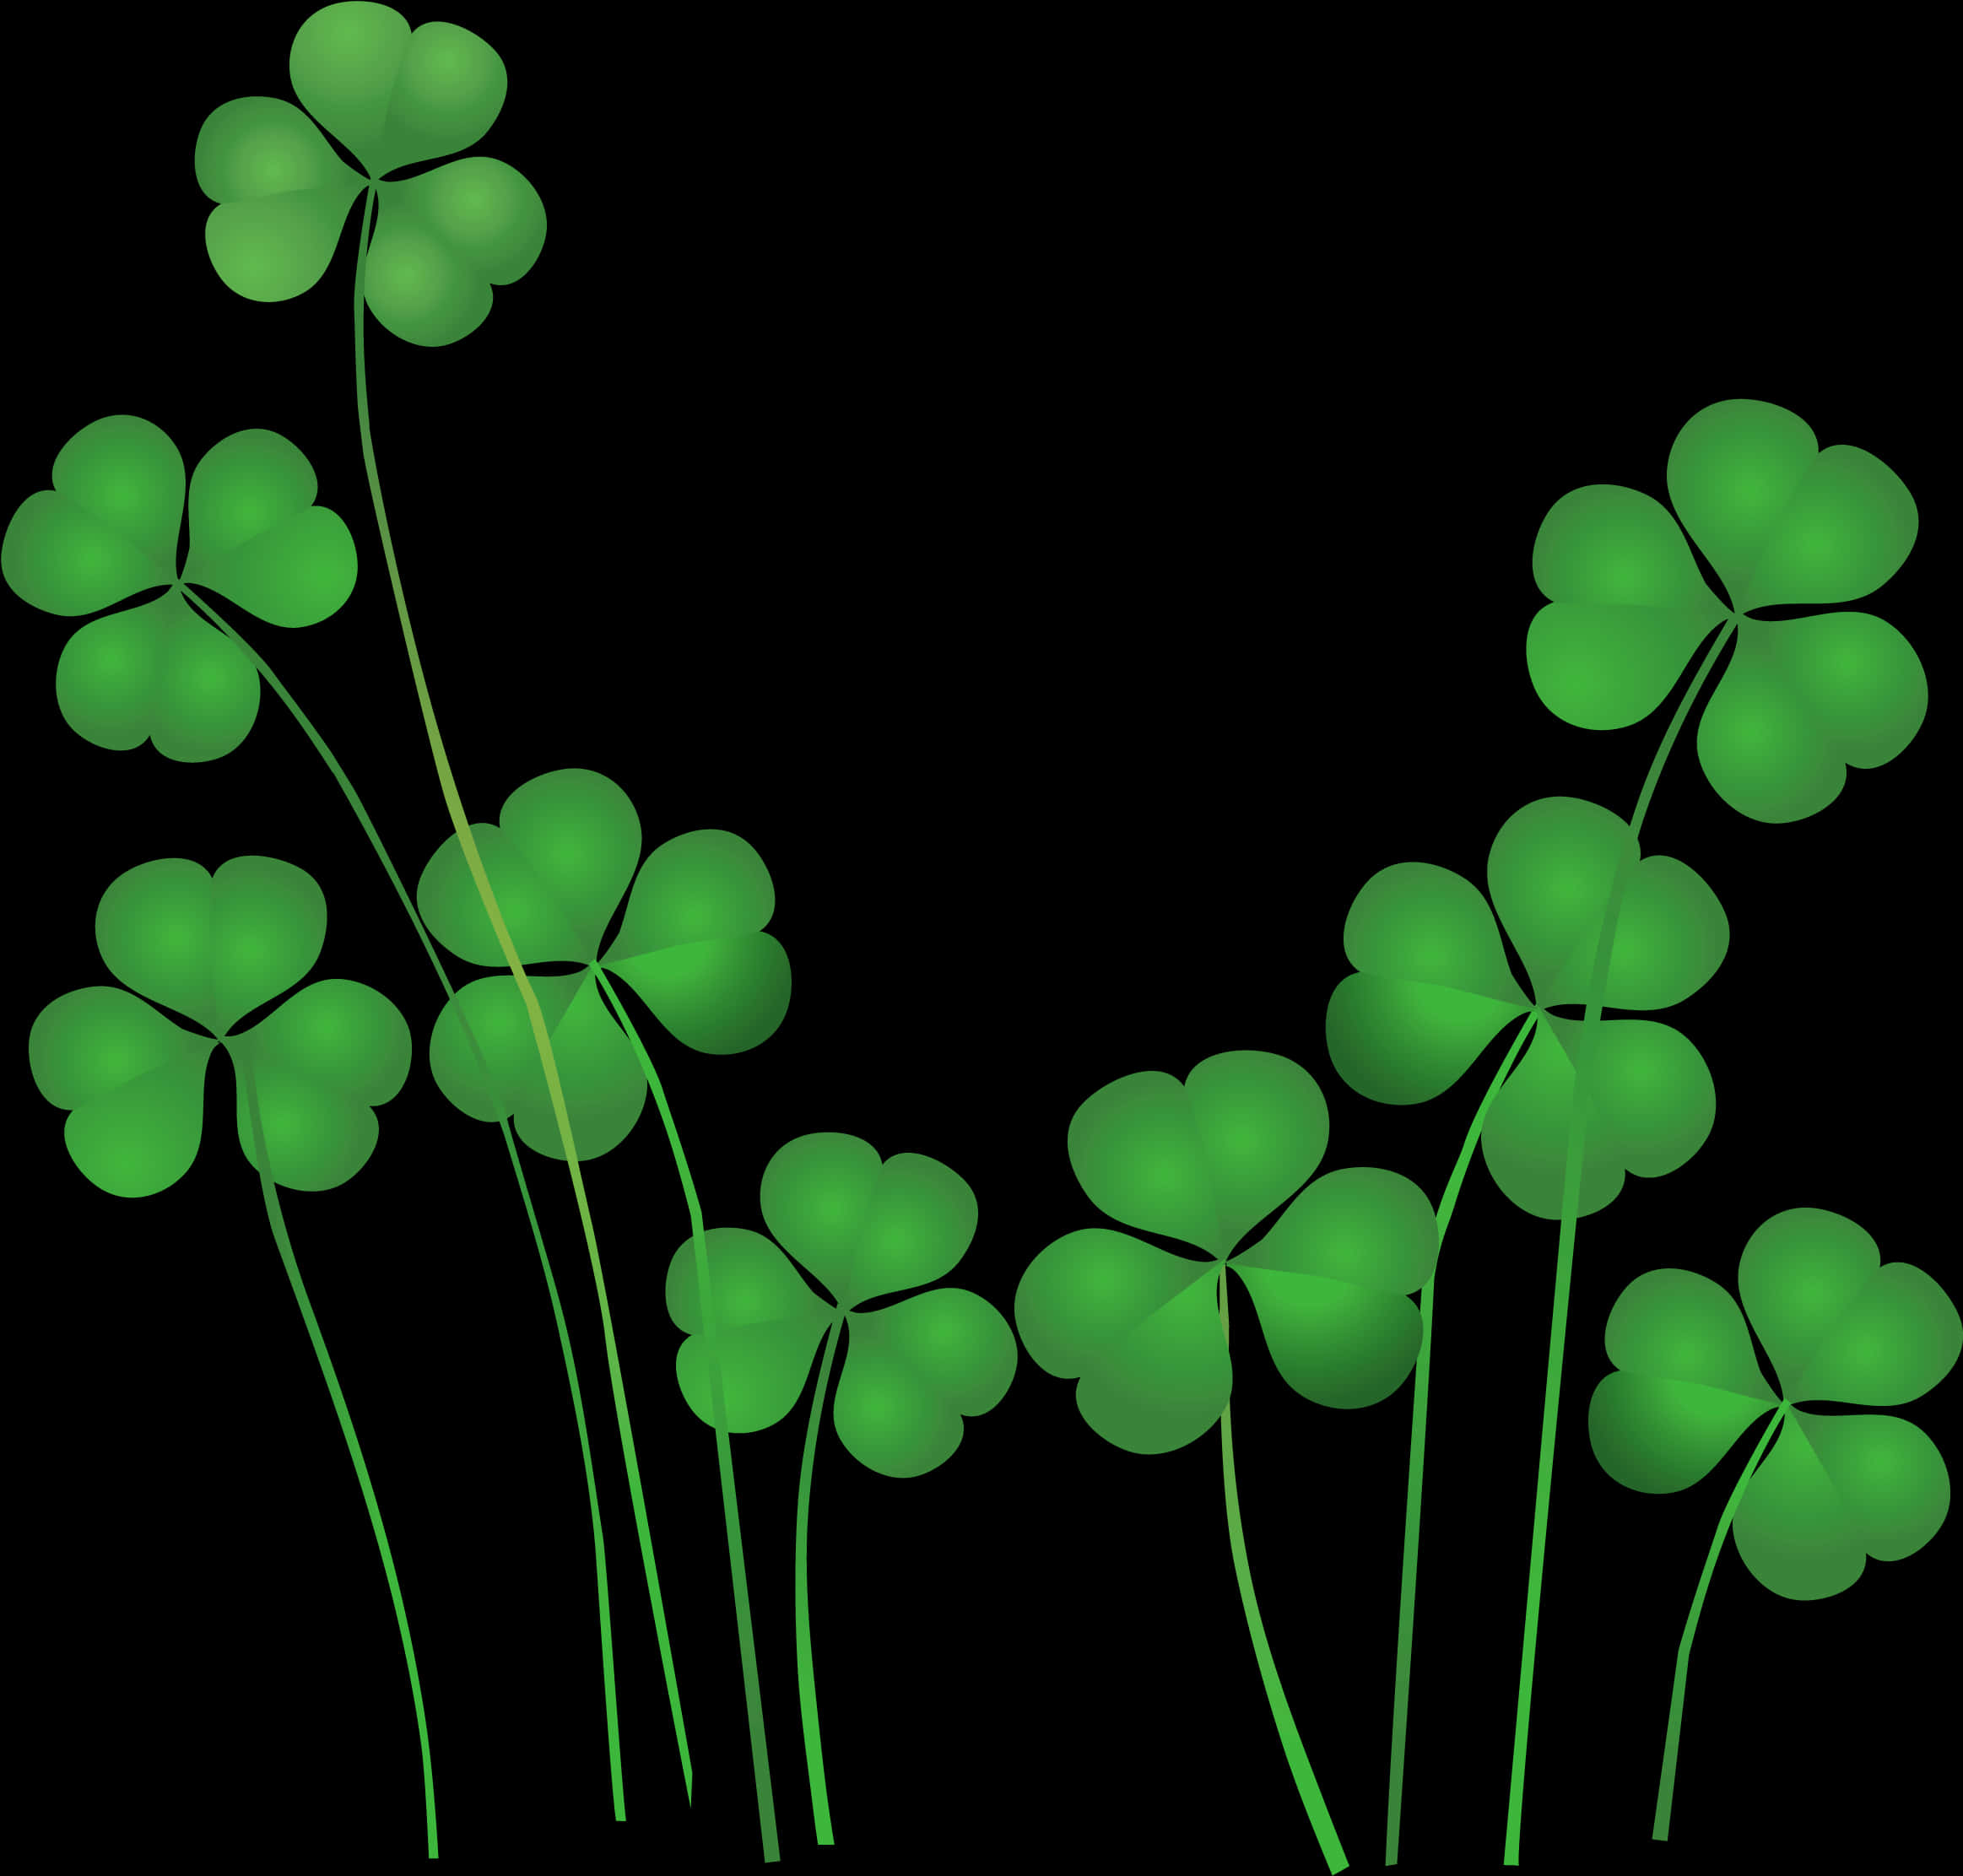 A Group Of Clovers On A Black Background